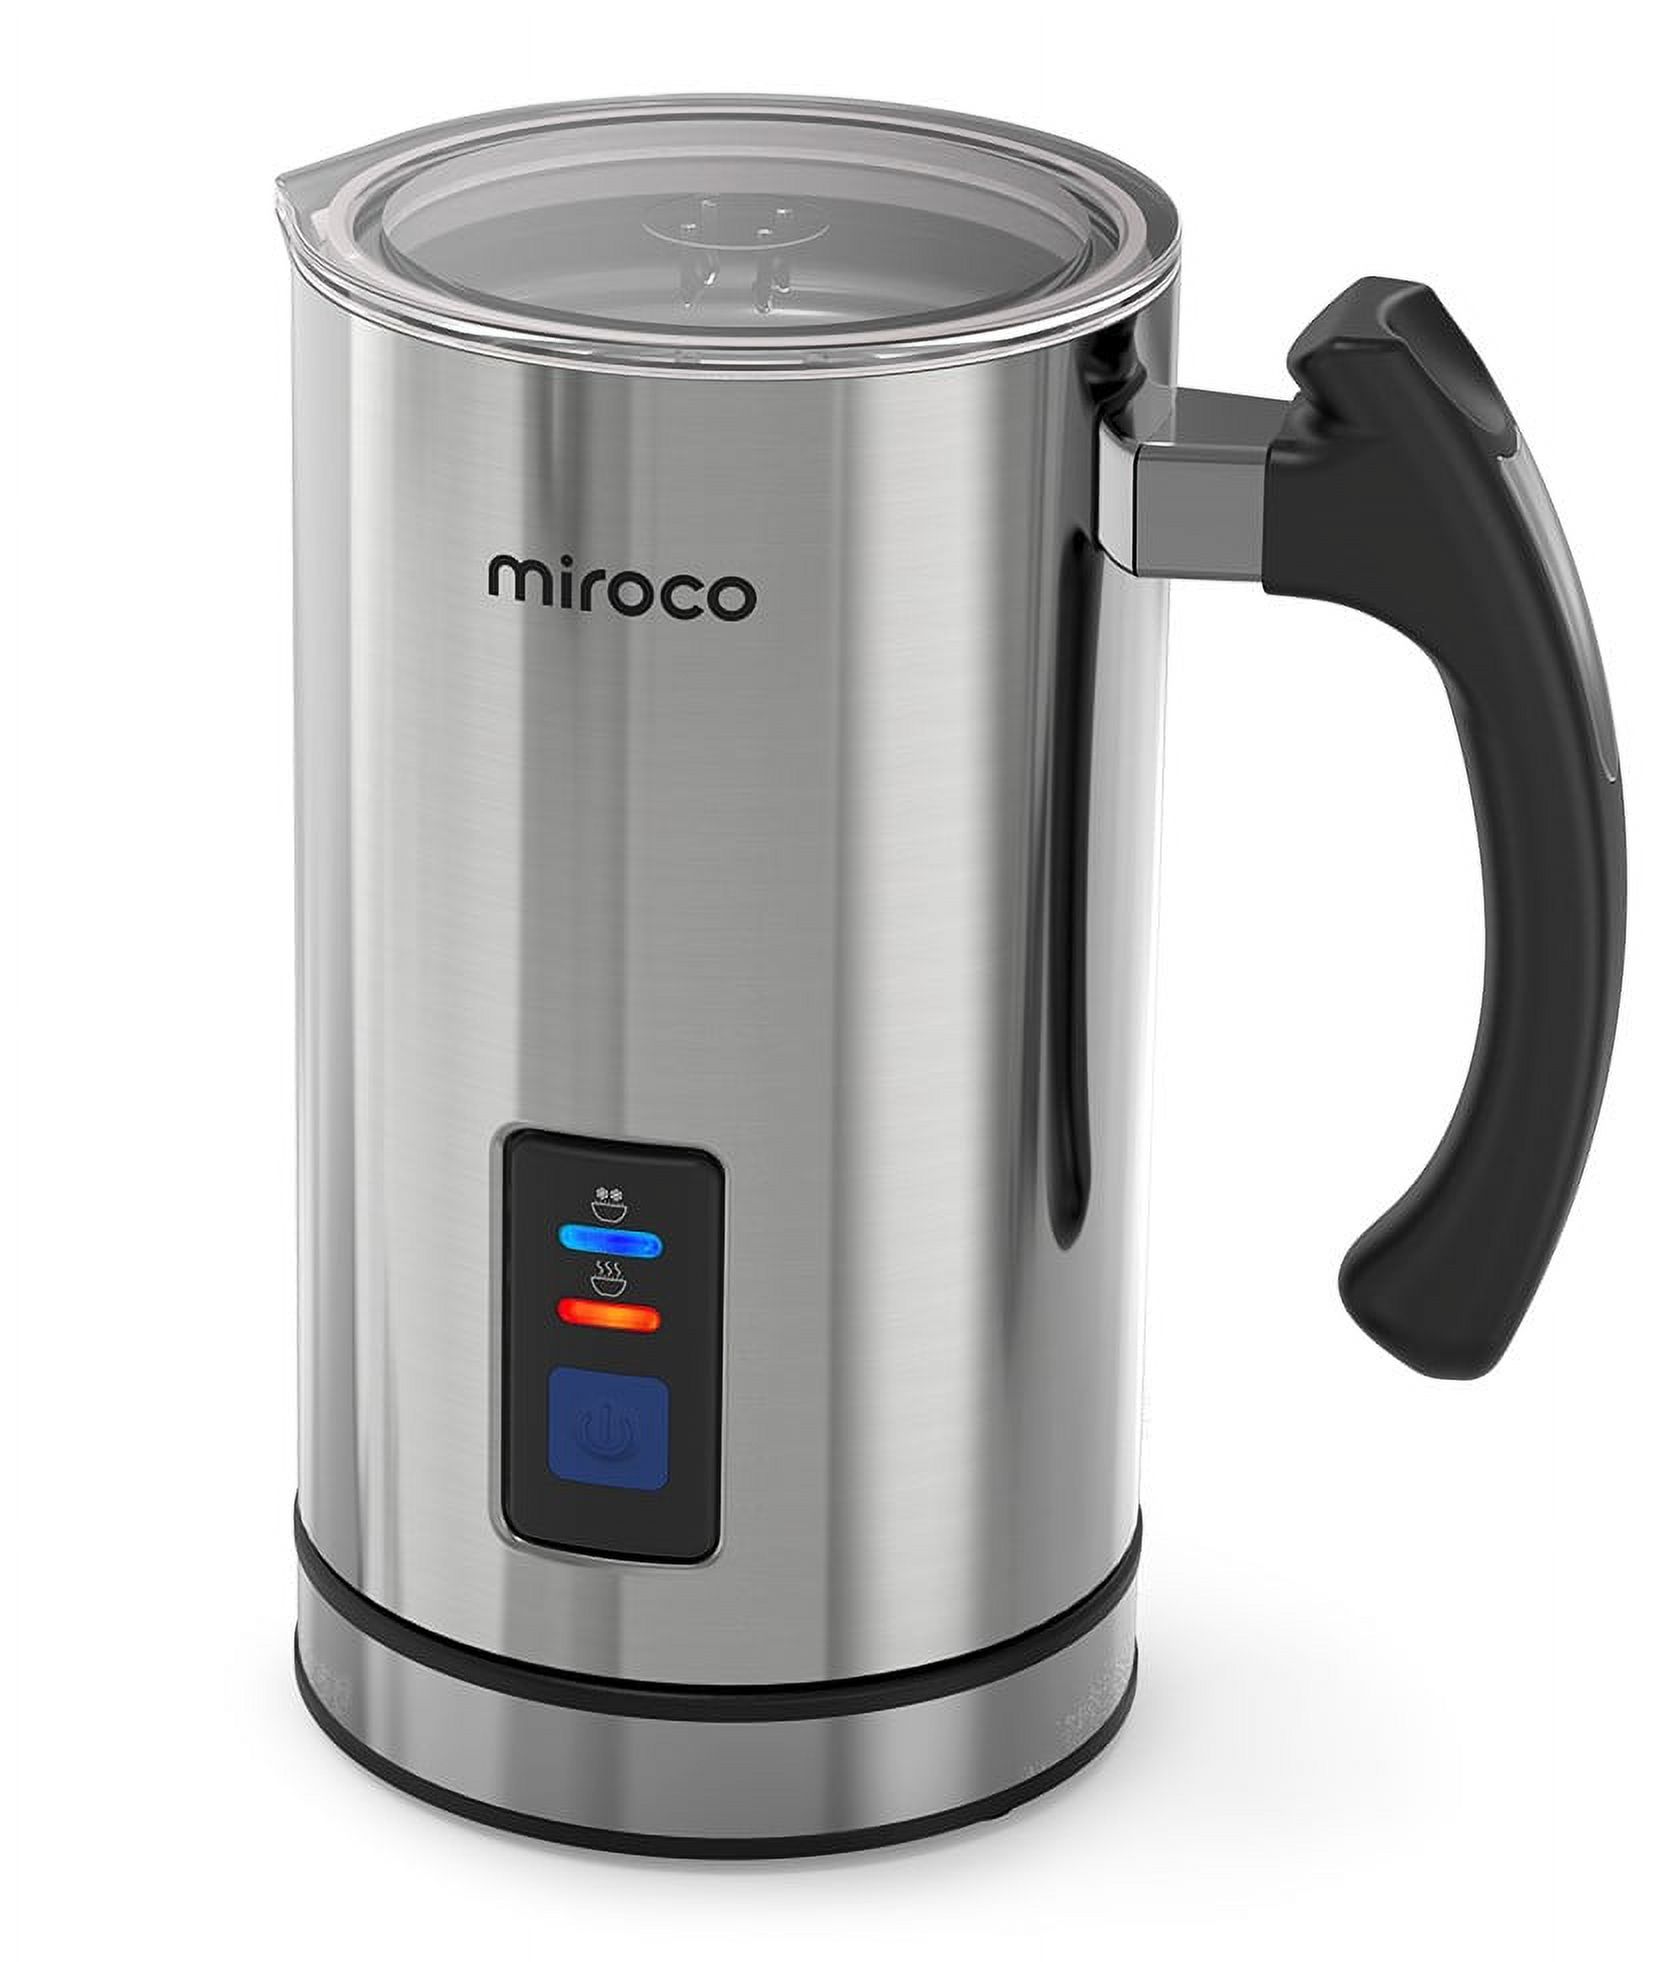 Miroco Milk Frother with Hot & Cold Milk Functionality, Automatic Stainless Steel Milk Steamer for Home, Silver - image 1 of 10